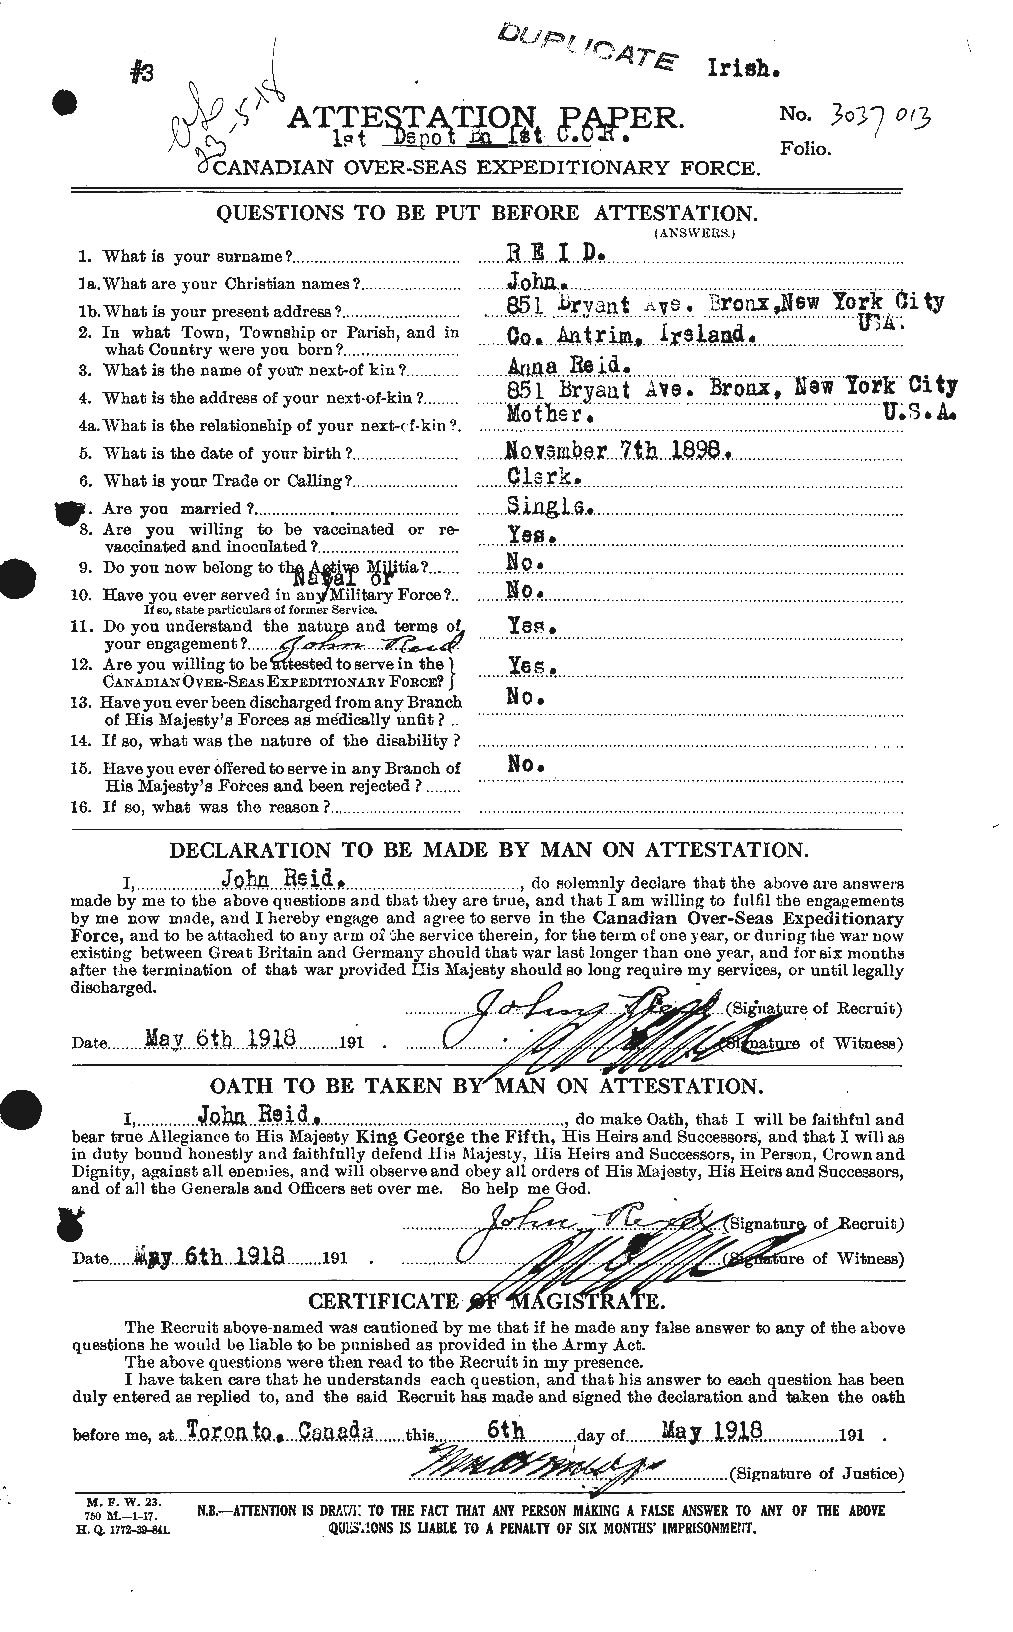 Personnel Records of the First World War - CEF 598808a